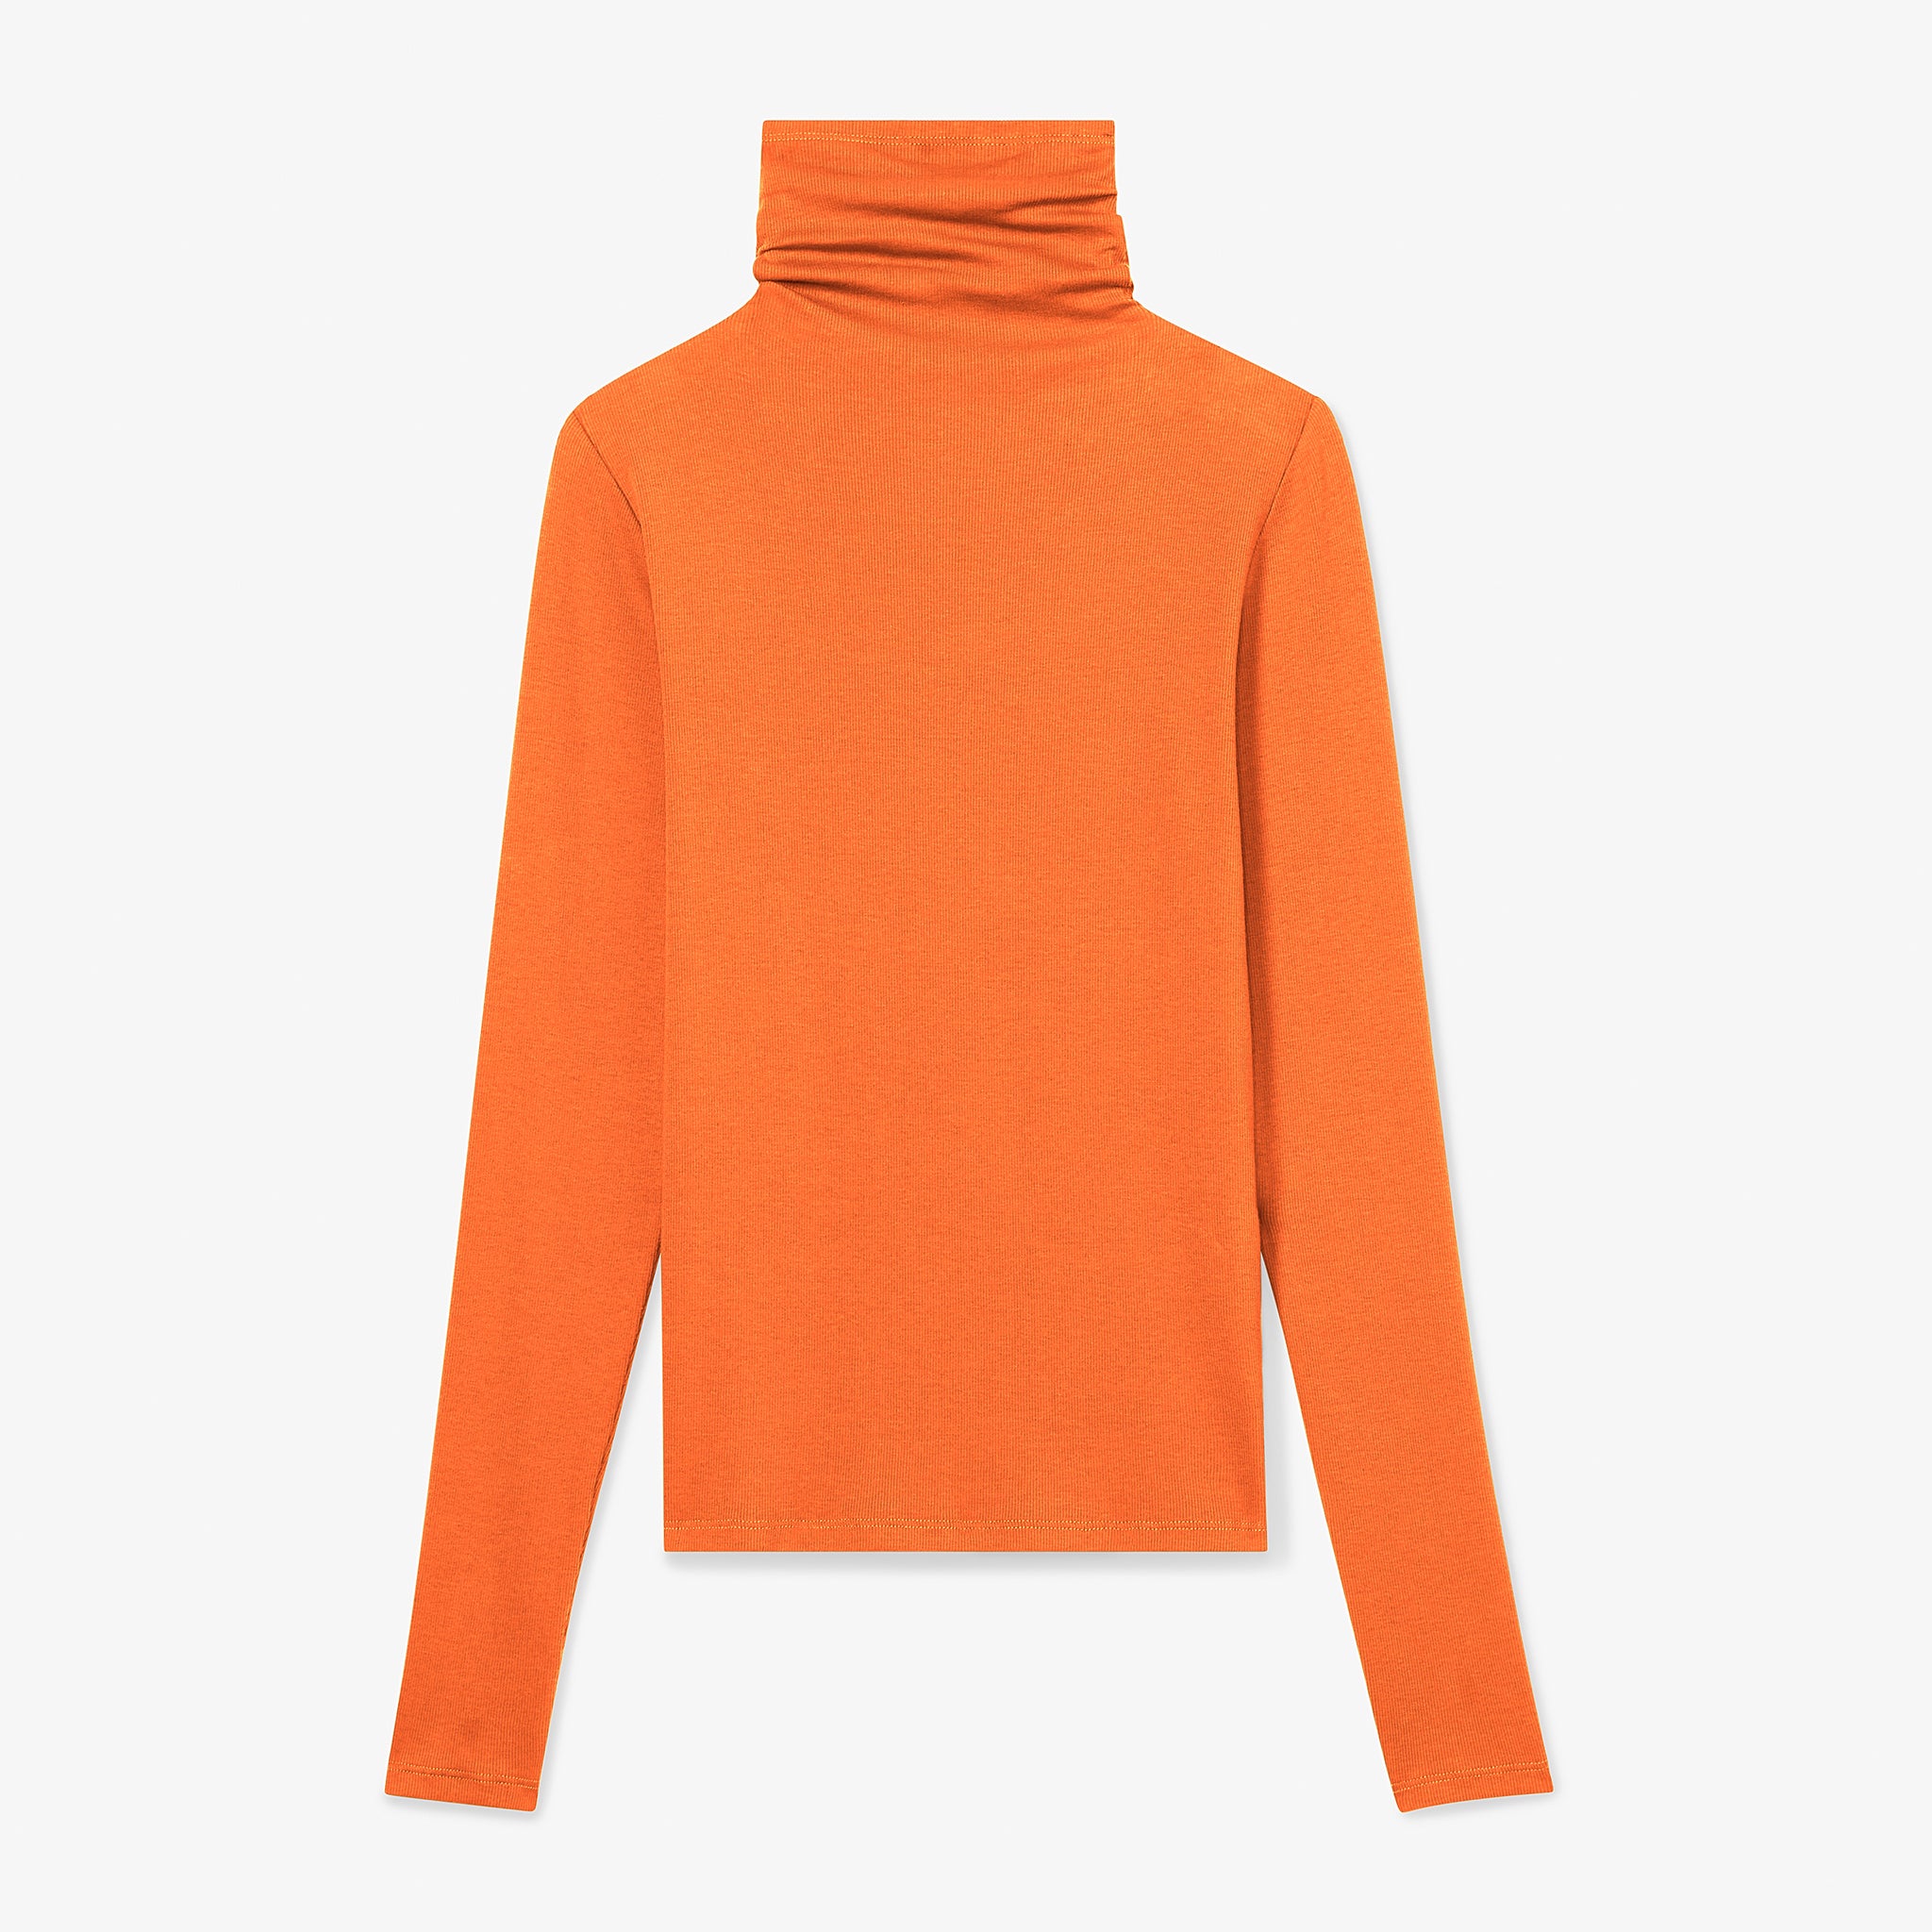 Packshot of the axam sweater in clementine